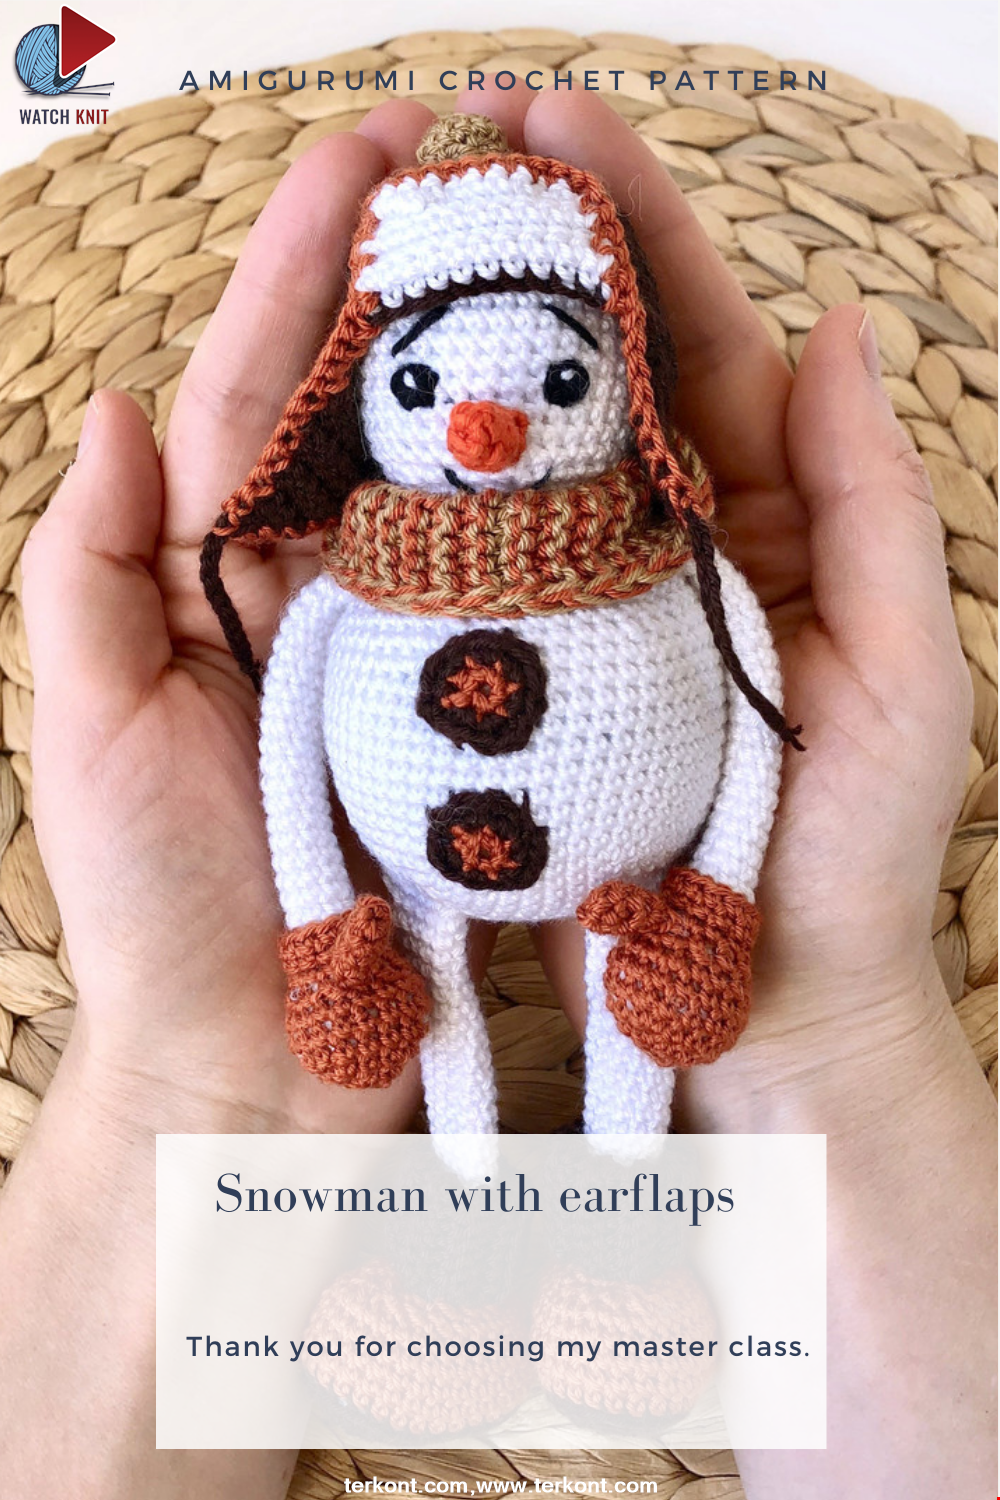 Snowman in a hat with earflaps